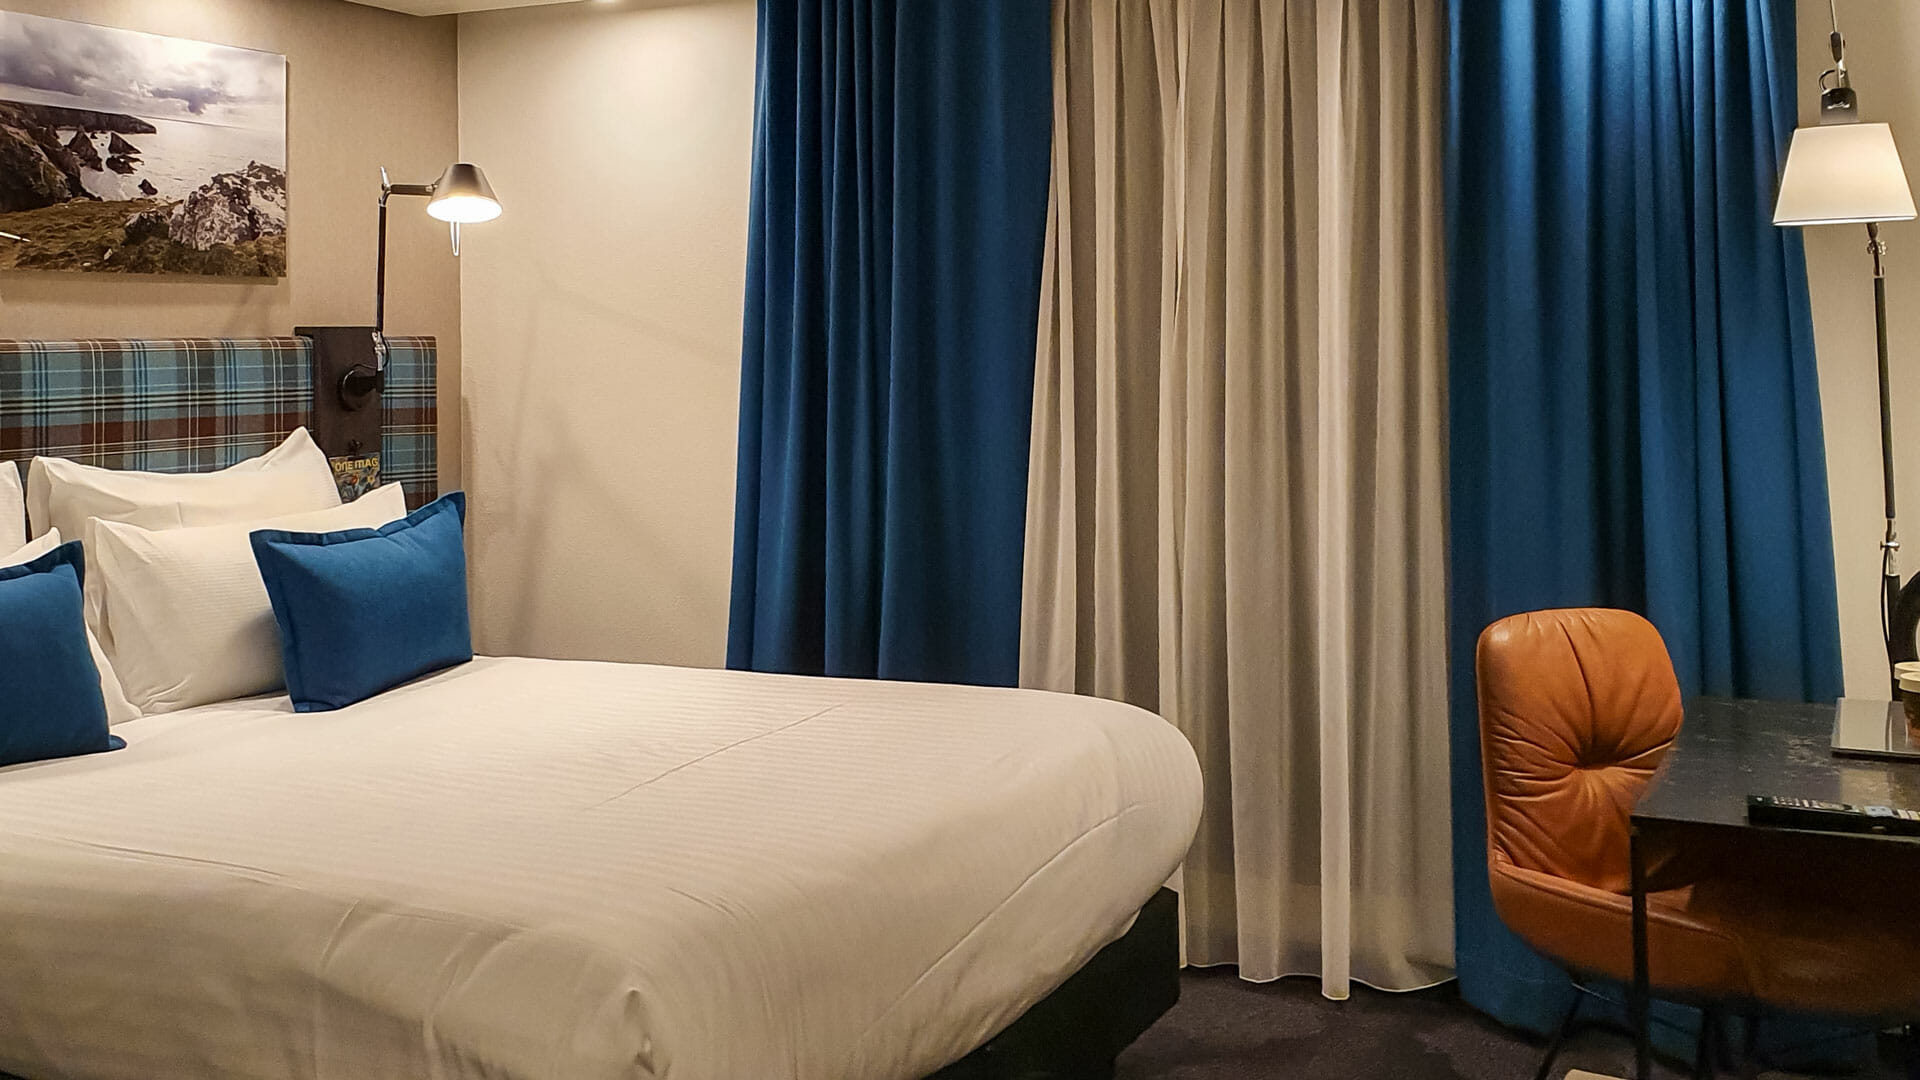 A view of a room at Motel One. With a bed and curtains.